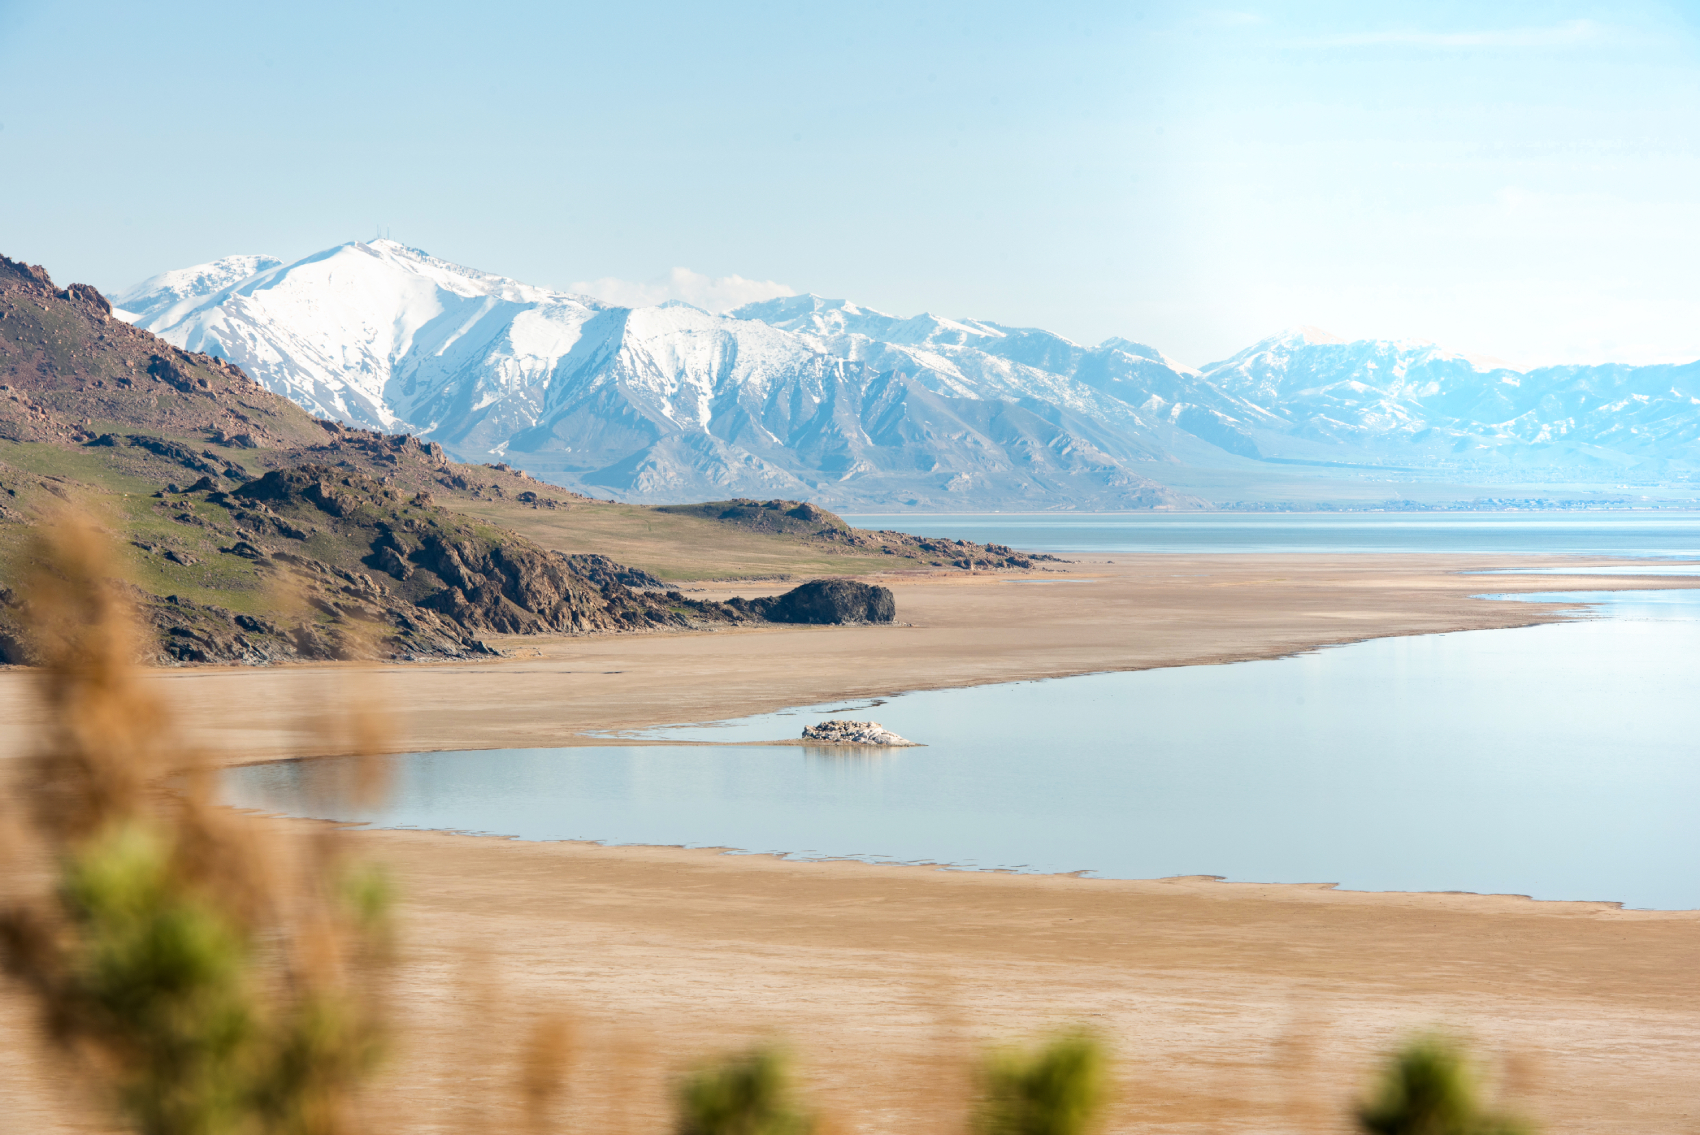 the great salt lake at medium tide, with mountains in the background and a white salty beach showing how far the lake has fallen.